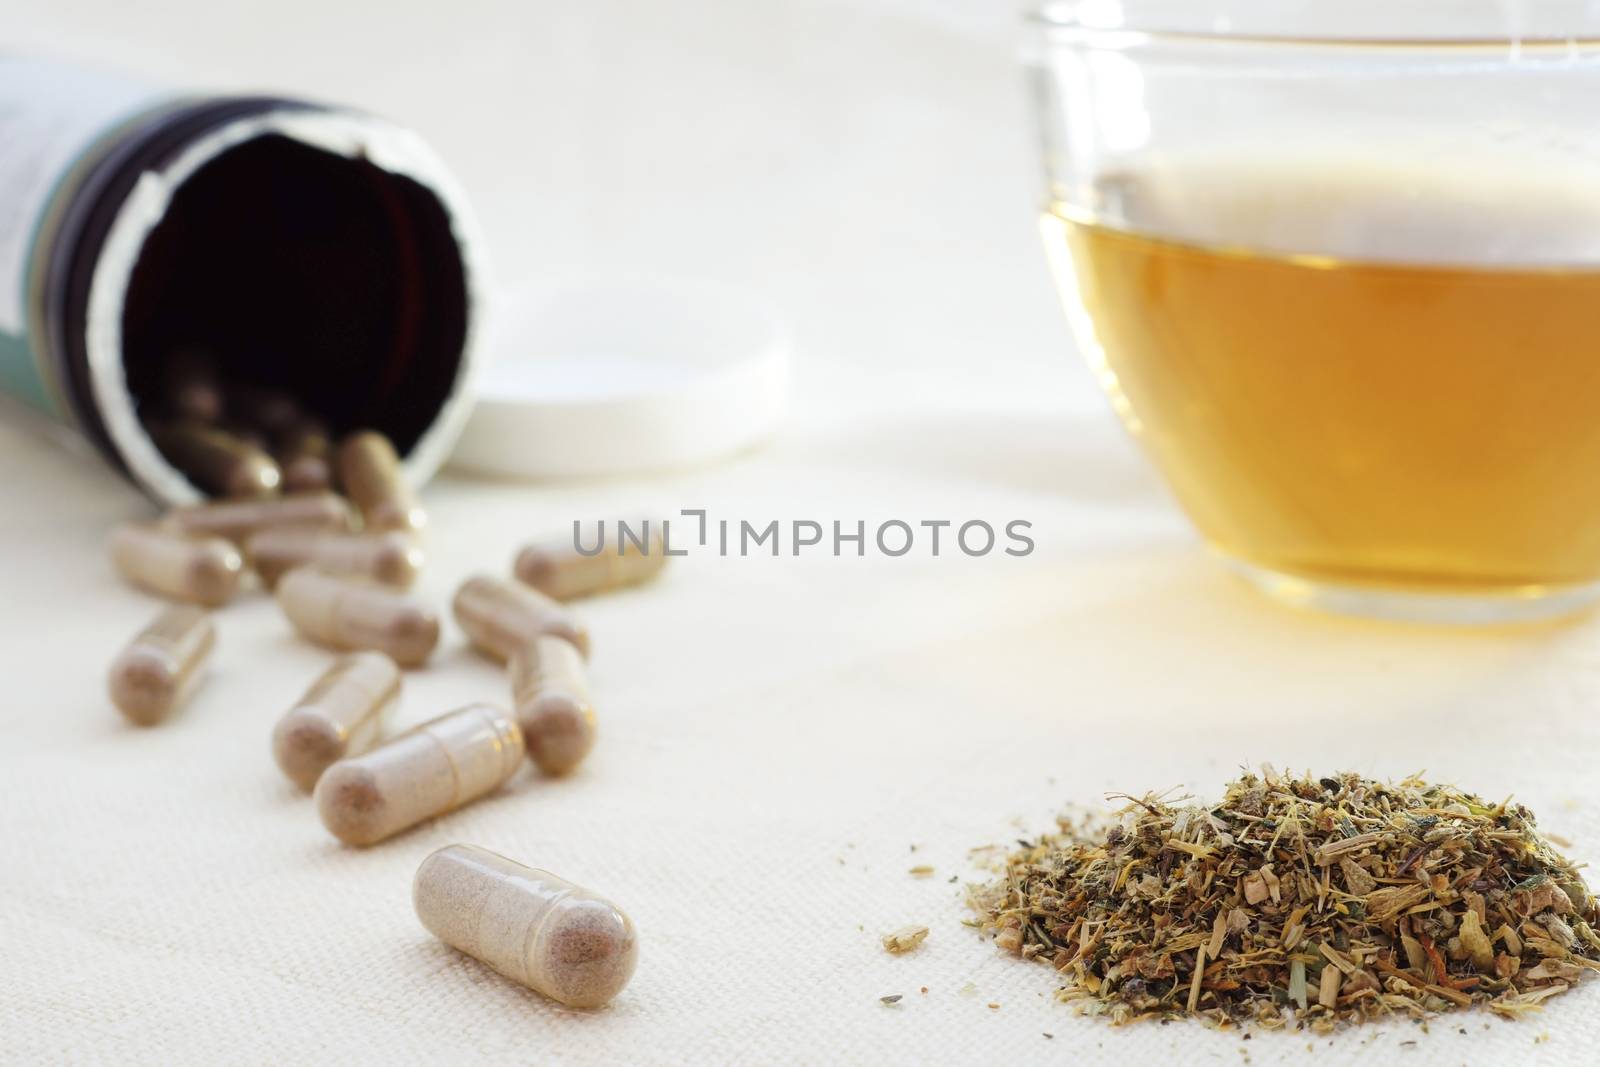 mixture of dried herbs with herbal tea and herbal pills